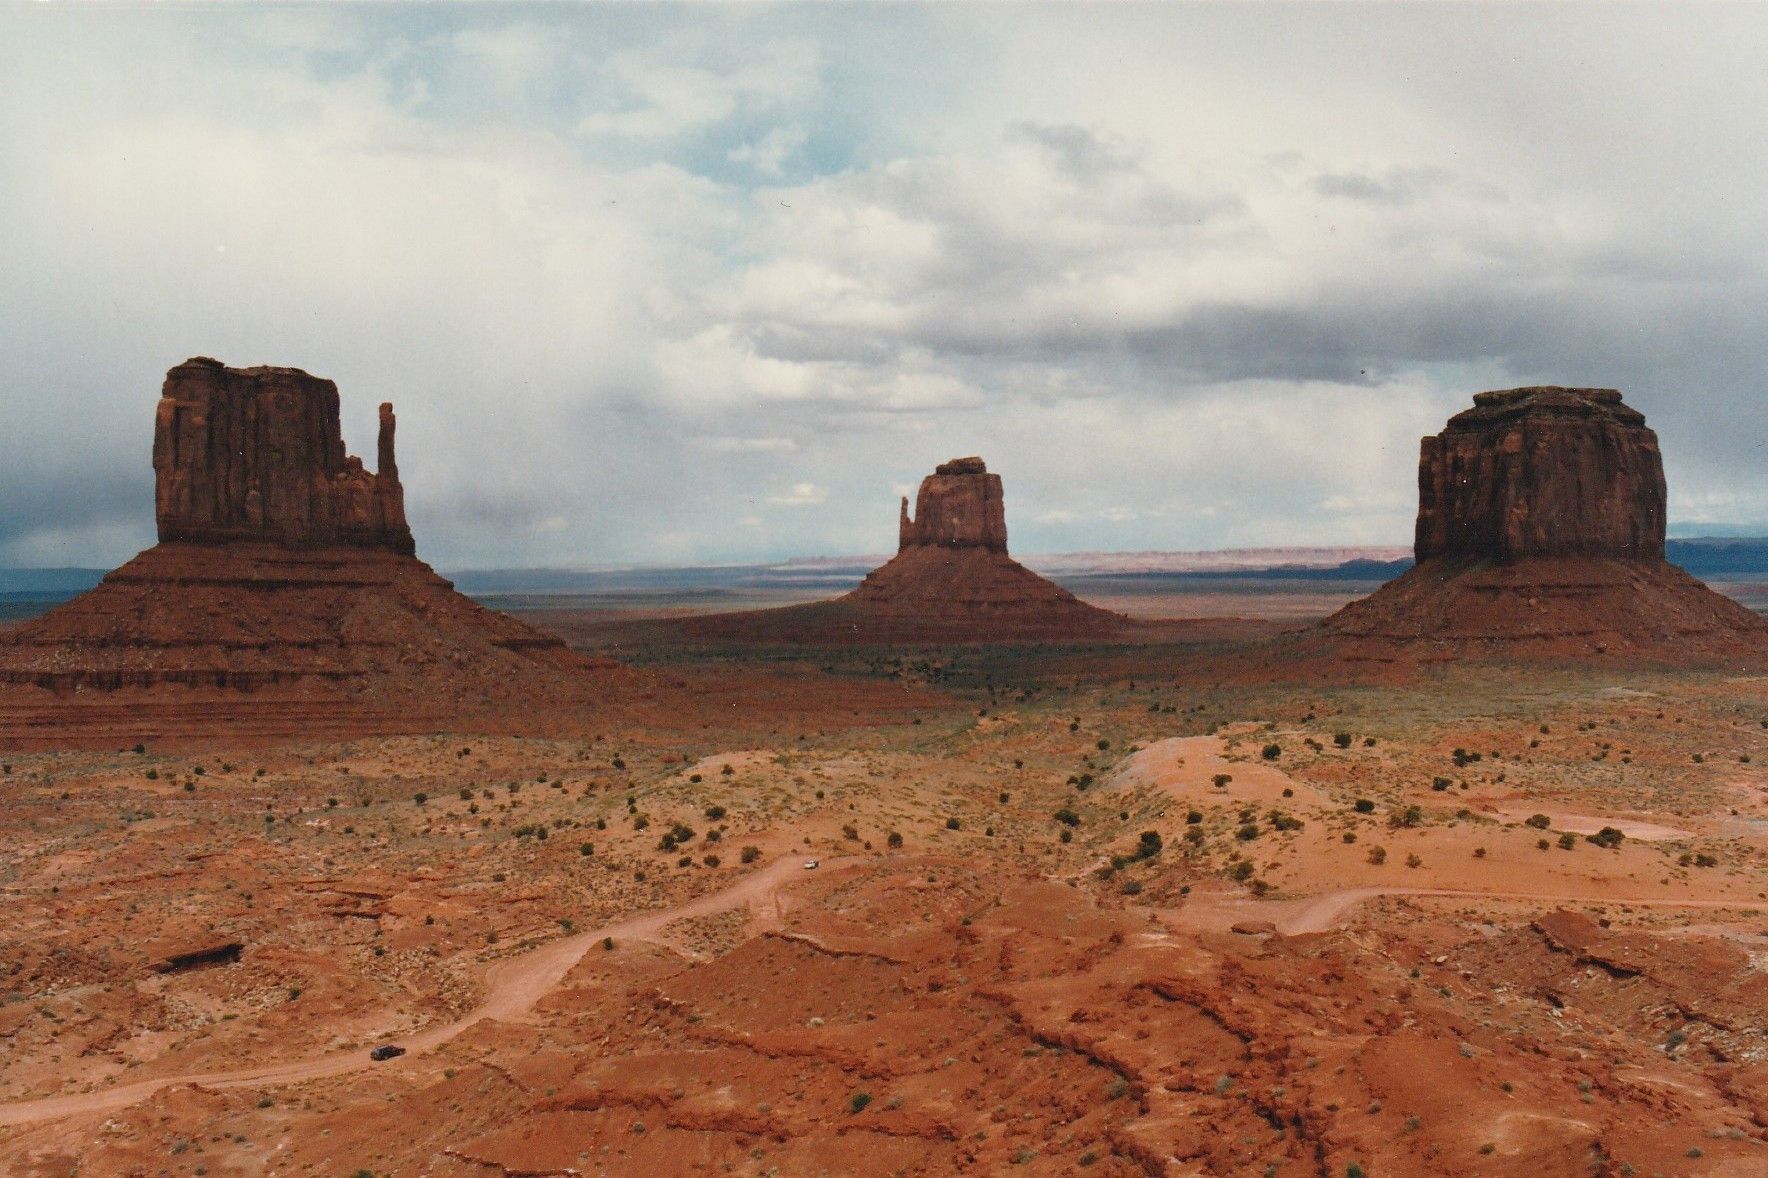 Monument Valley — The Mittens and Merrick Butte